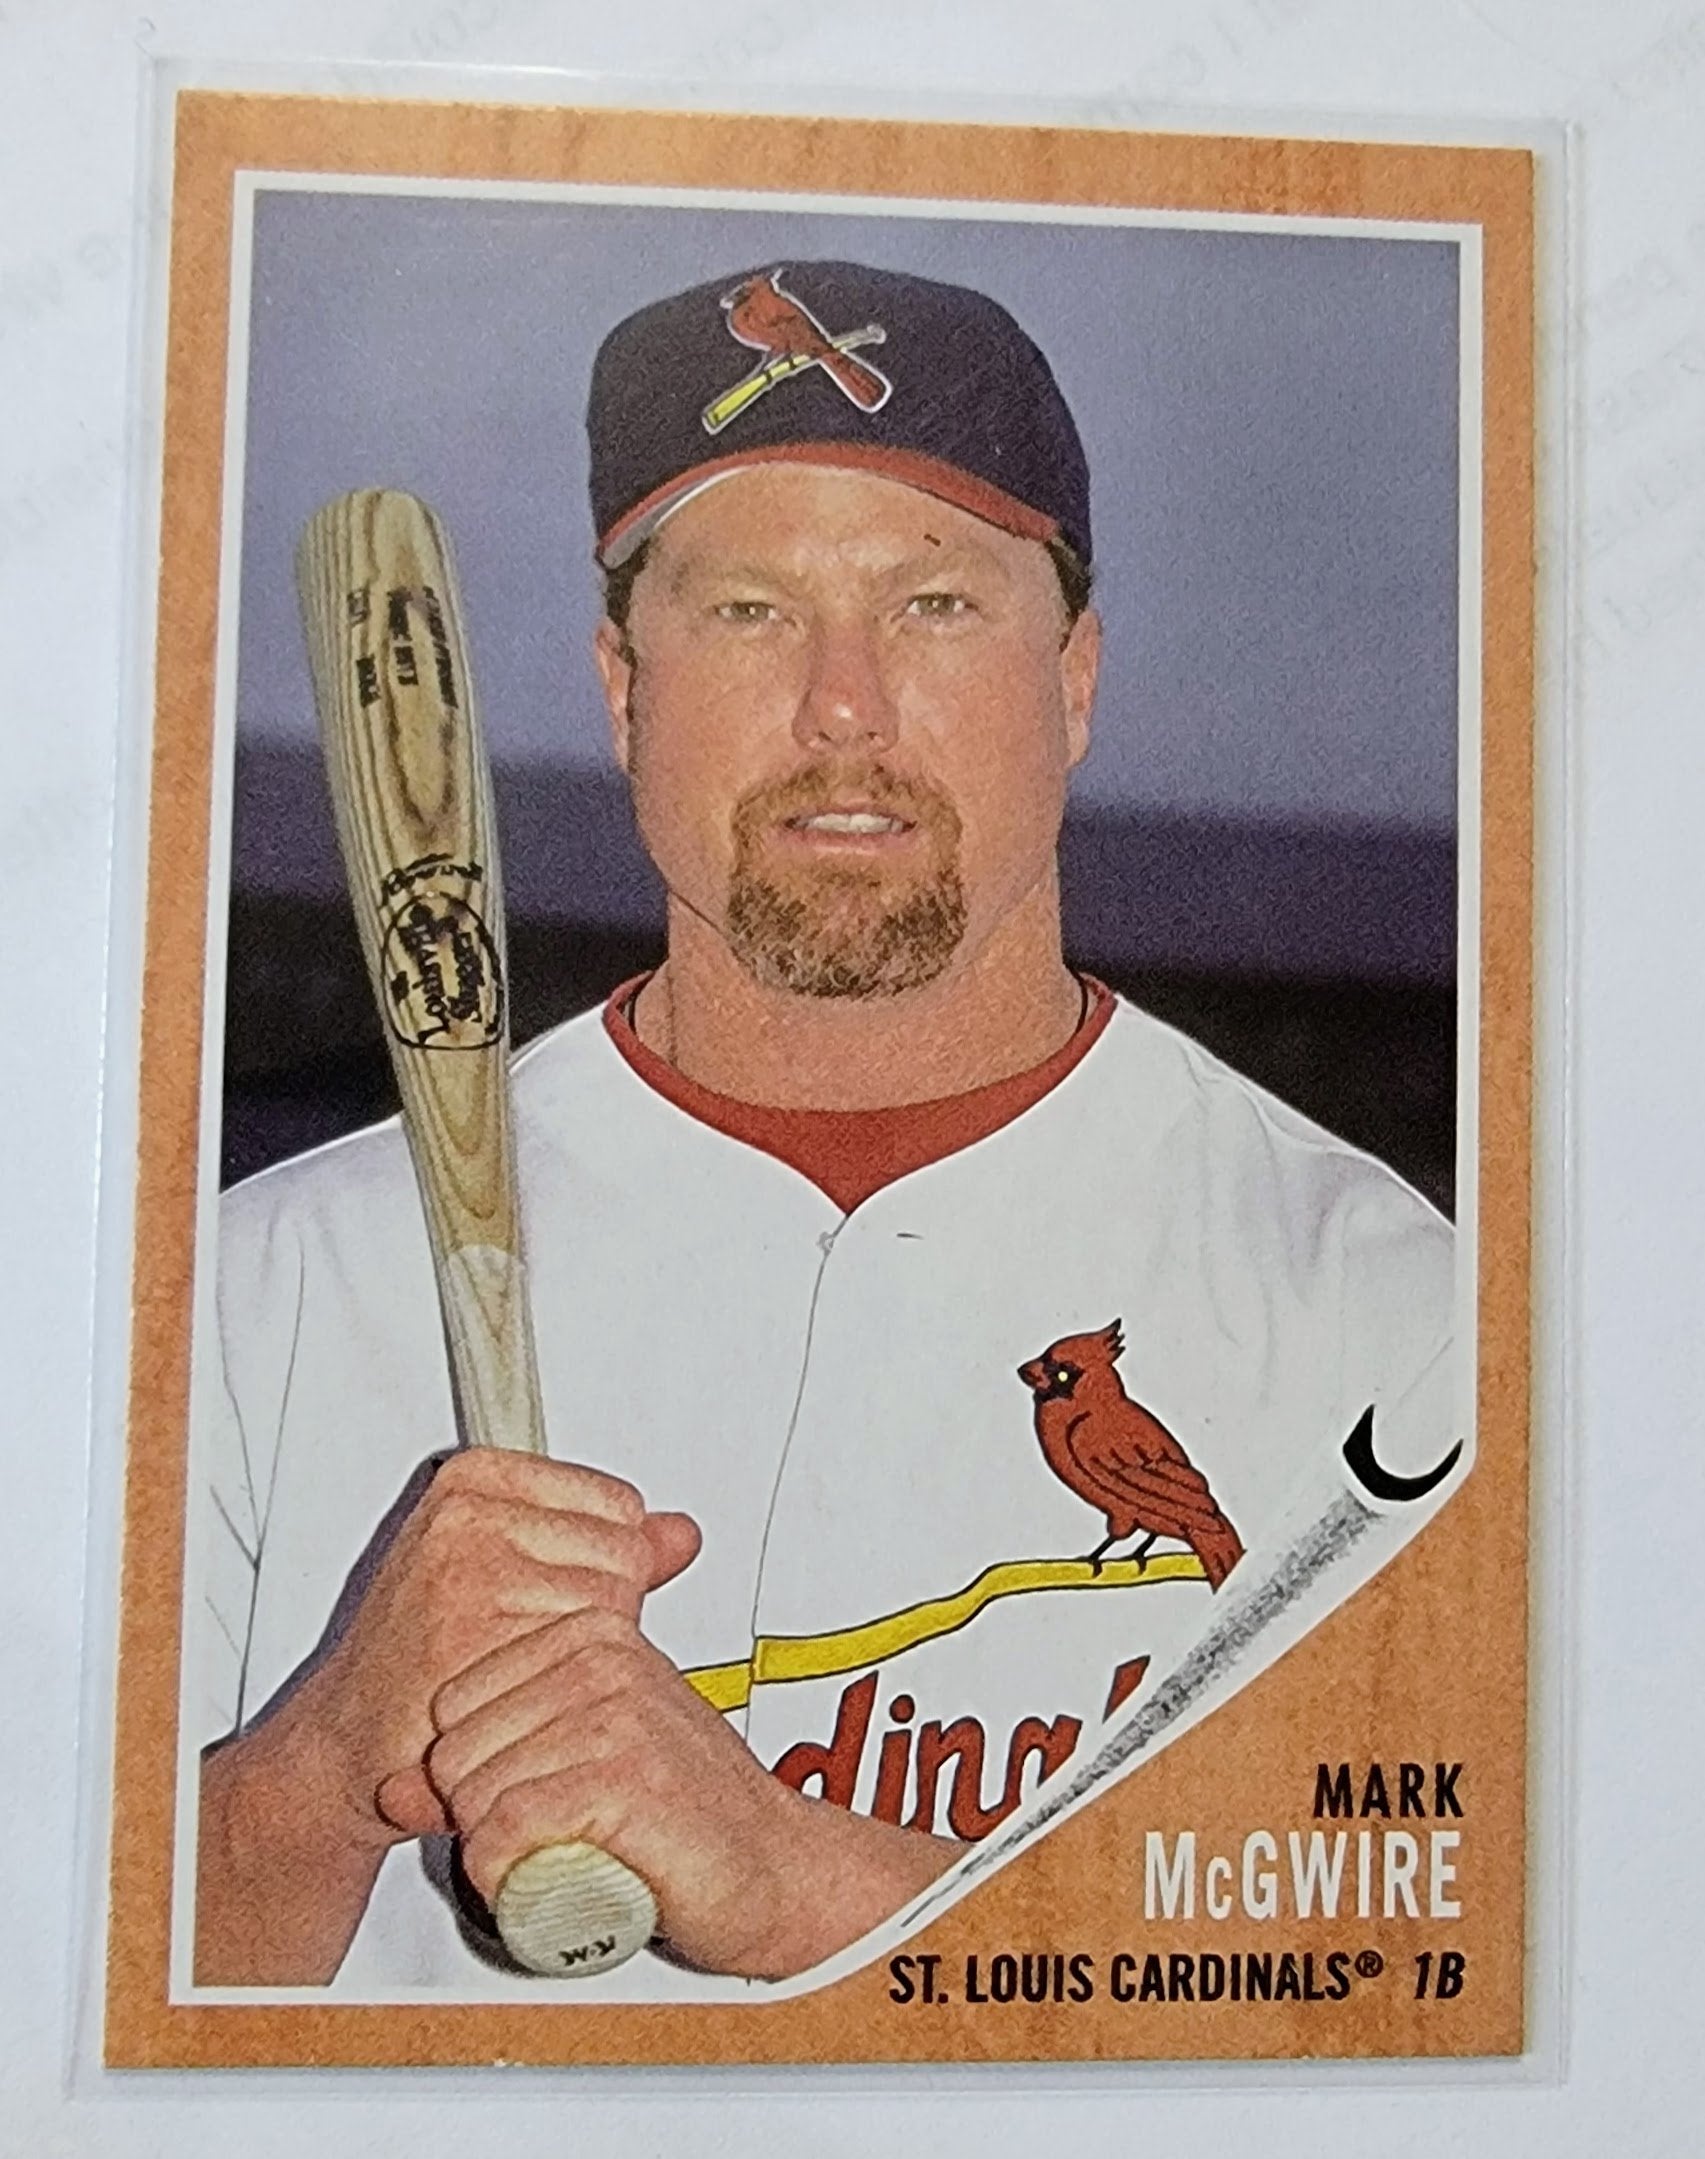 2021 Topps Archives Mark McGwire 1962 Baseball Trading Card SMCB1 simple Xclusive Collectibles   